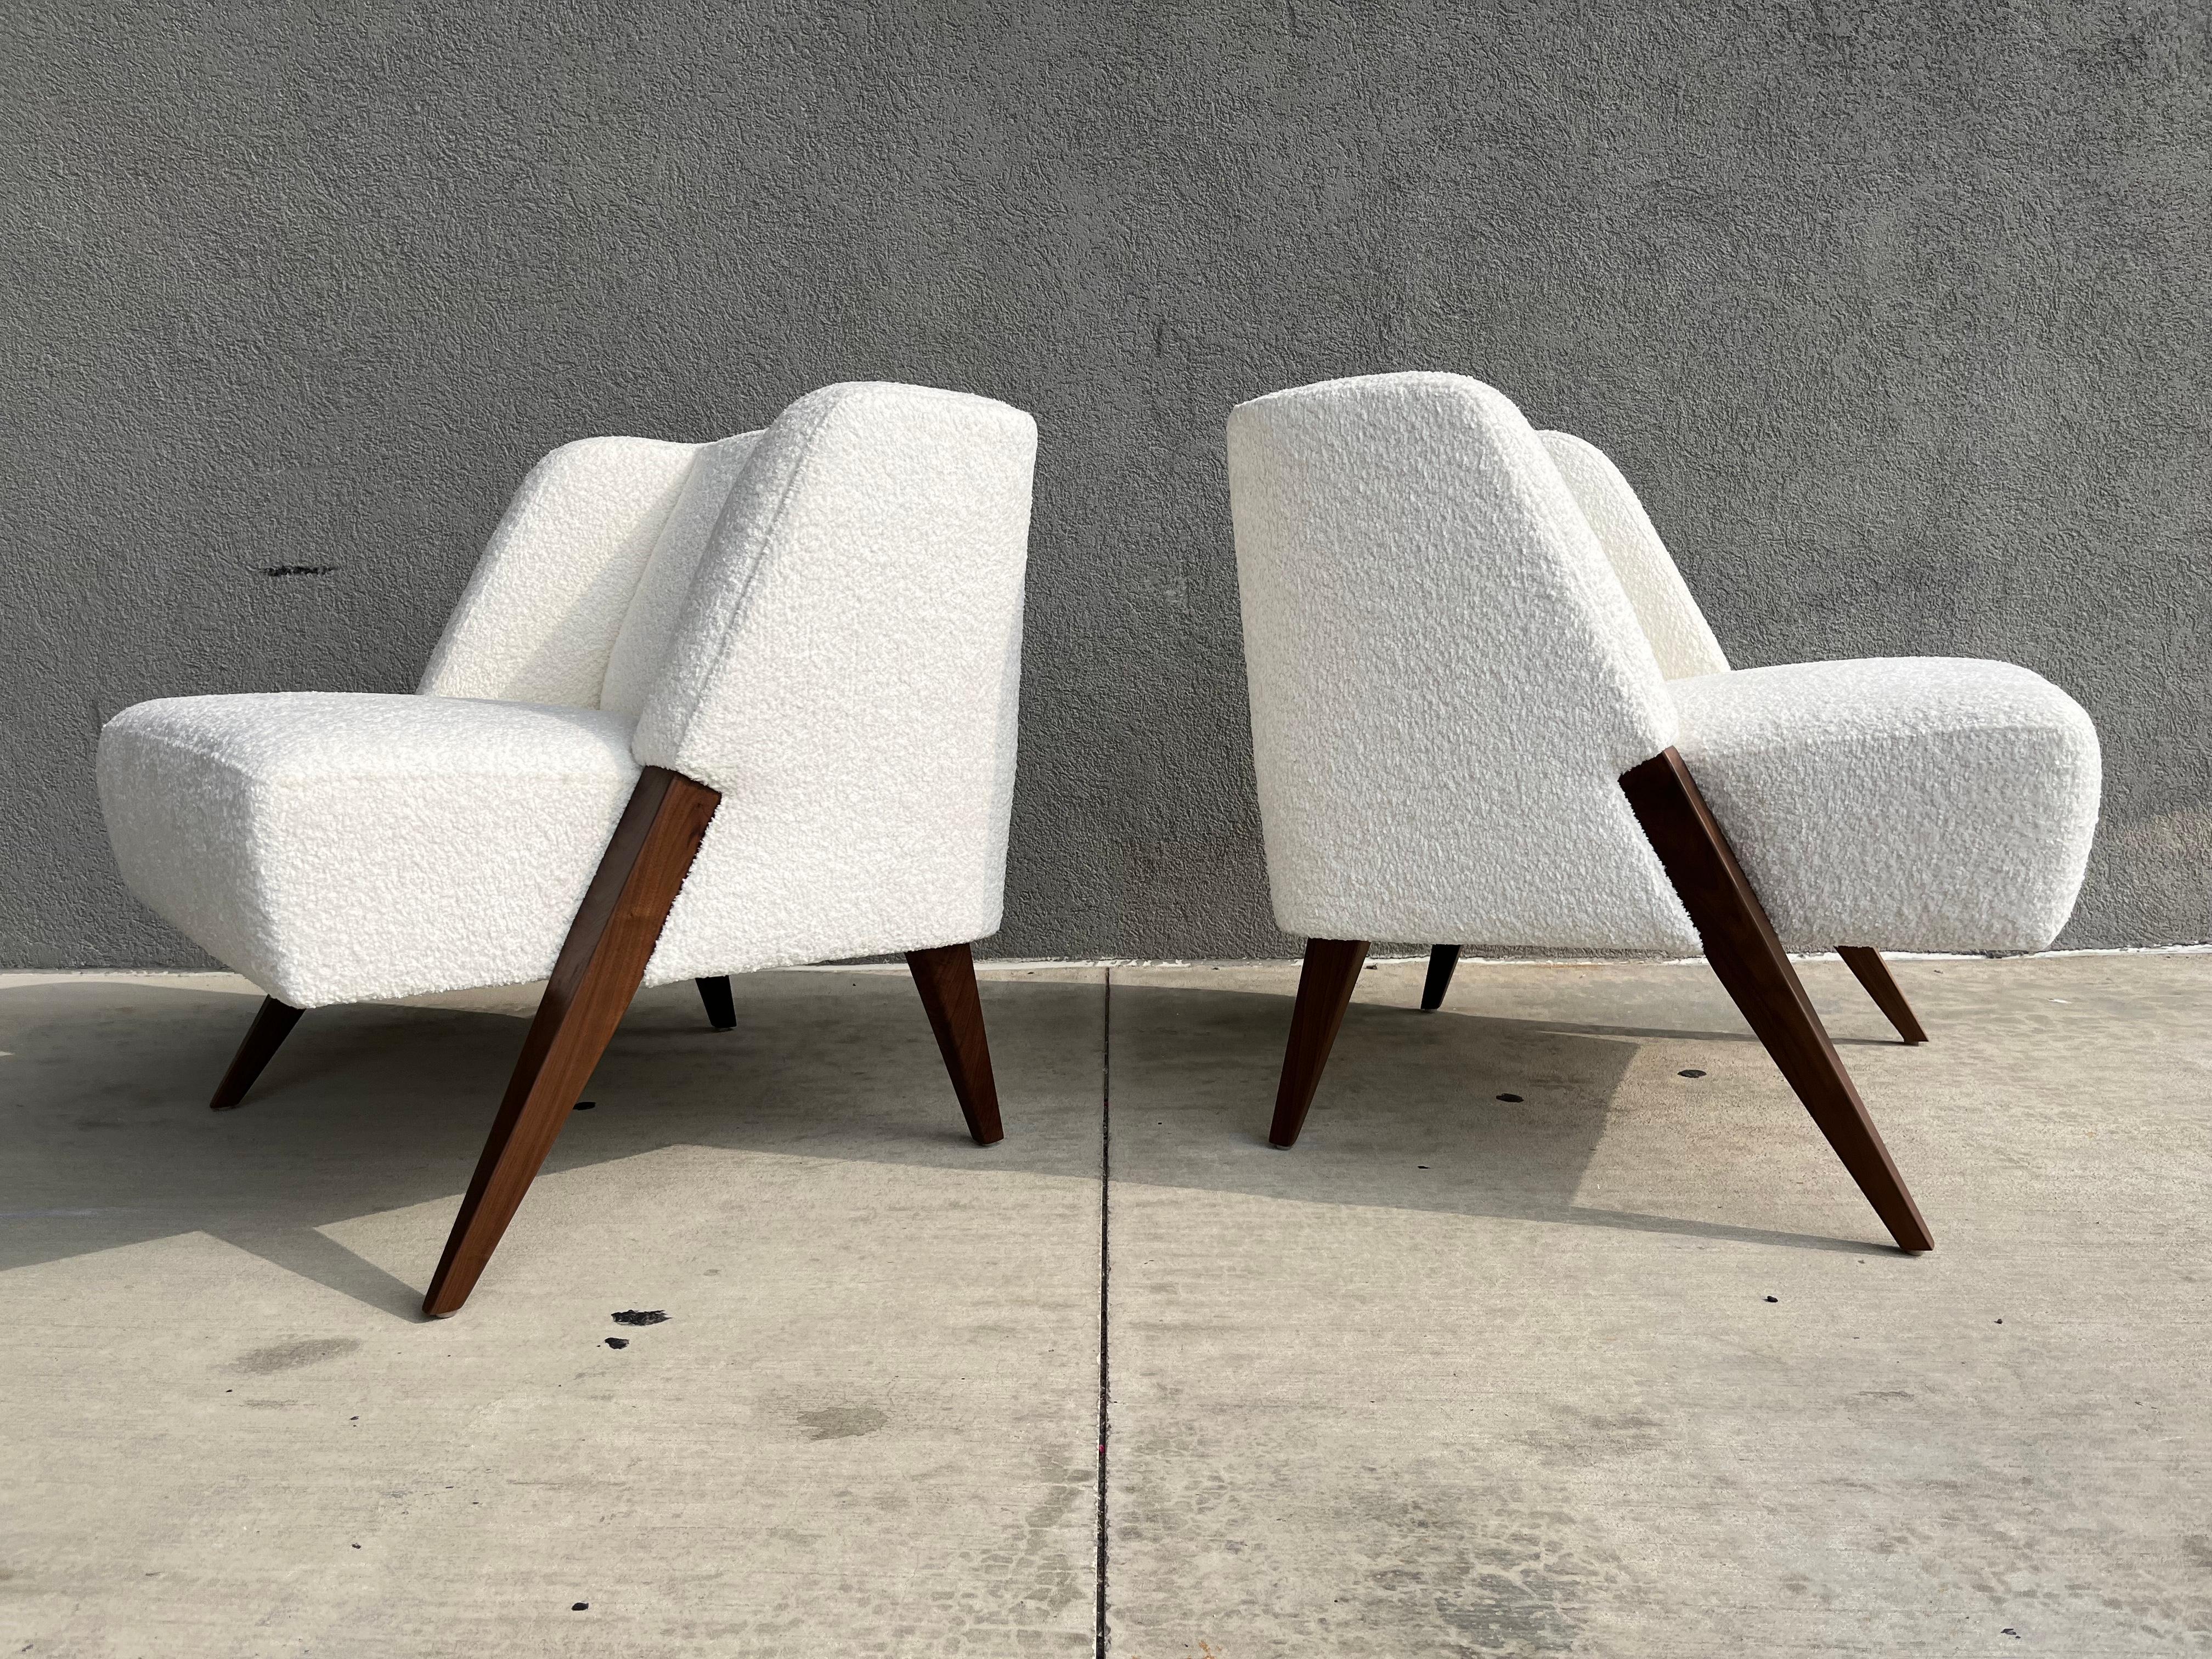 Incredible pair of RUTH lounge chairs by Dosbananos in the style of Gio Ponti. Solid walnut legs and ivory bouclé fabric. Ready for a new home.